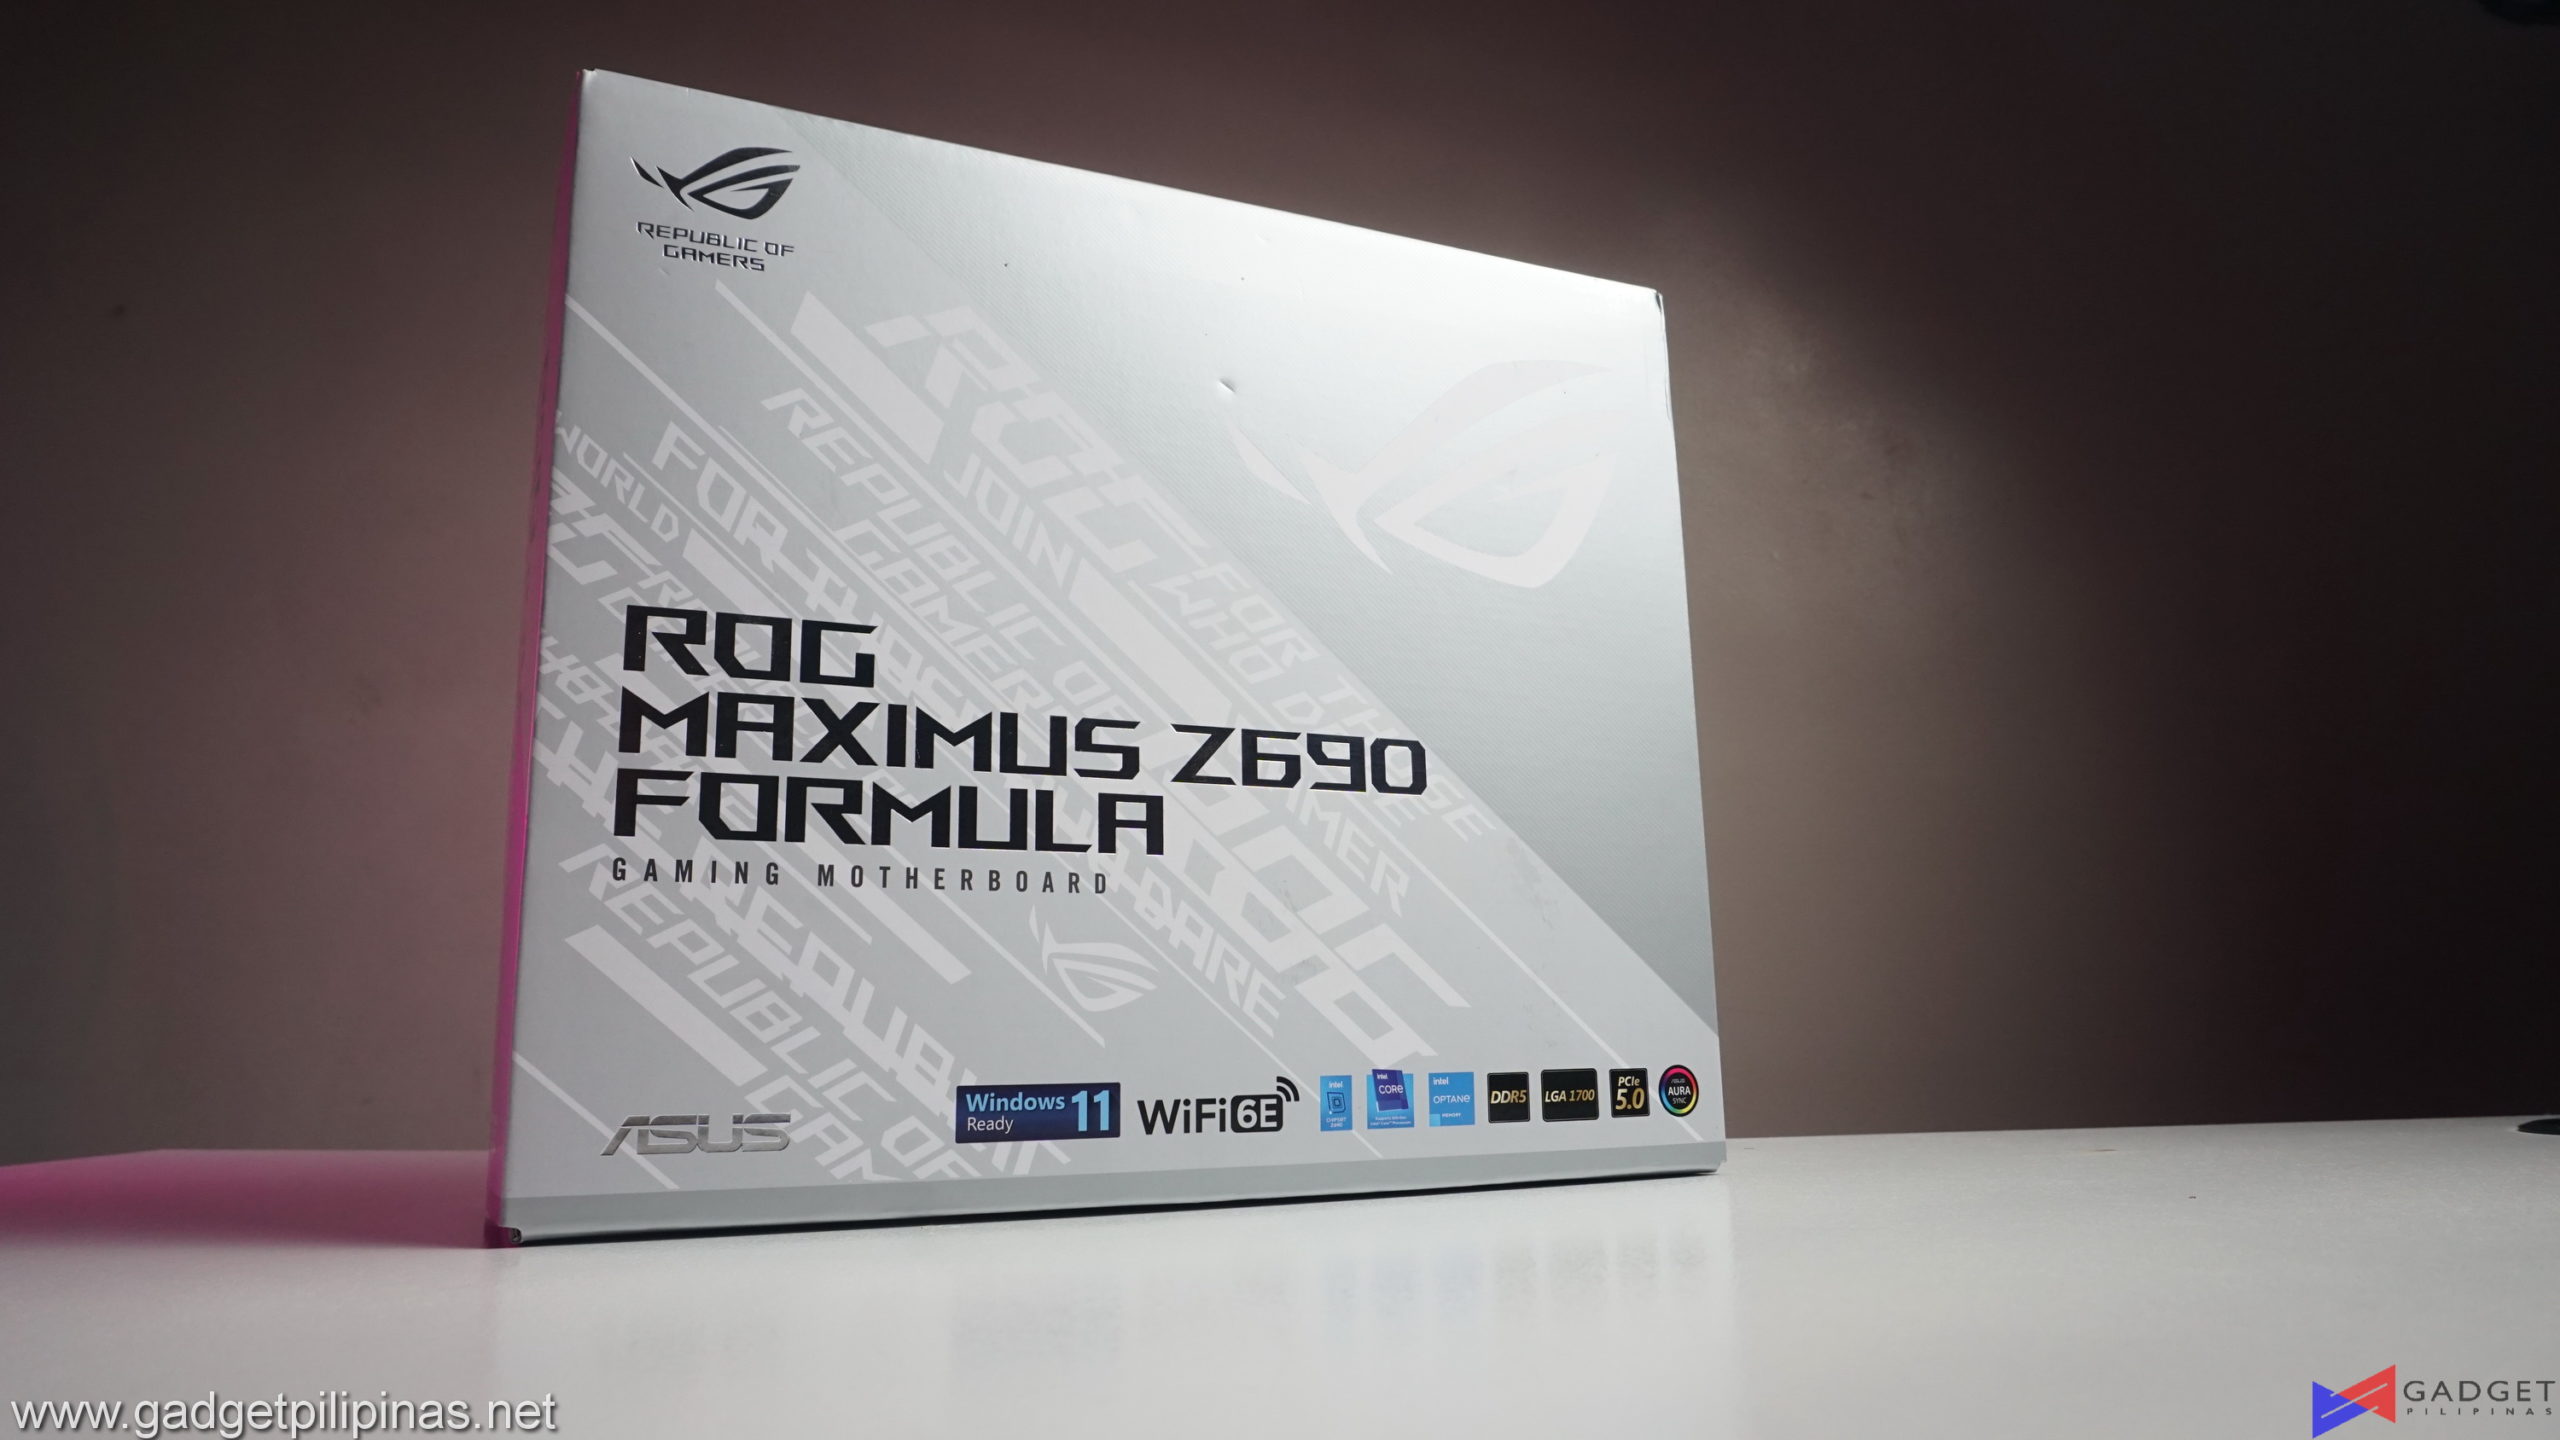 ASUS ROG Maximus Z690 Formula Motherboard Overview